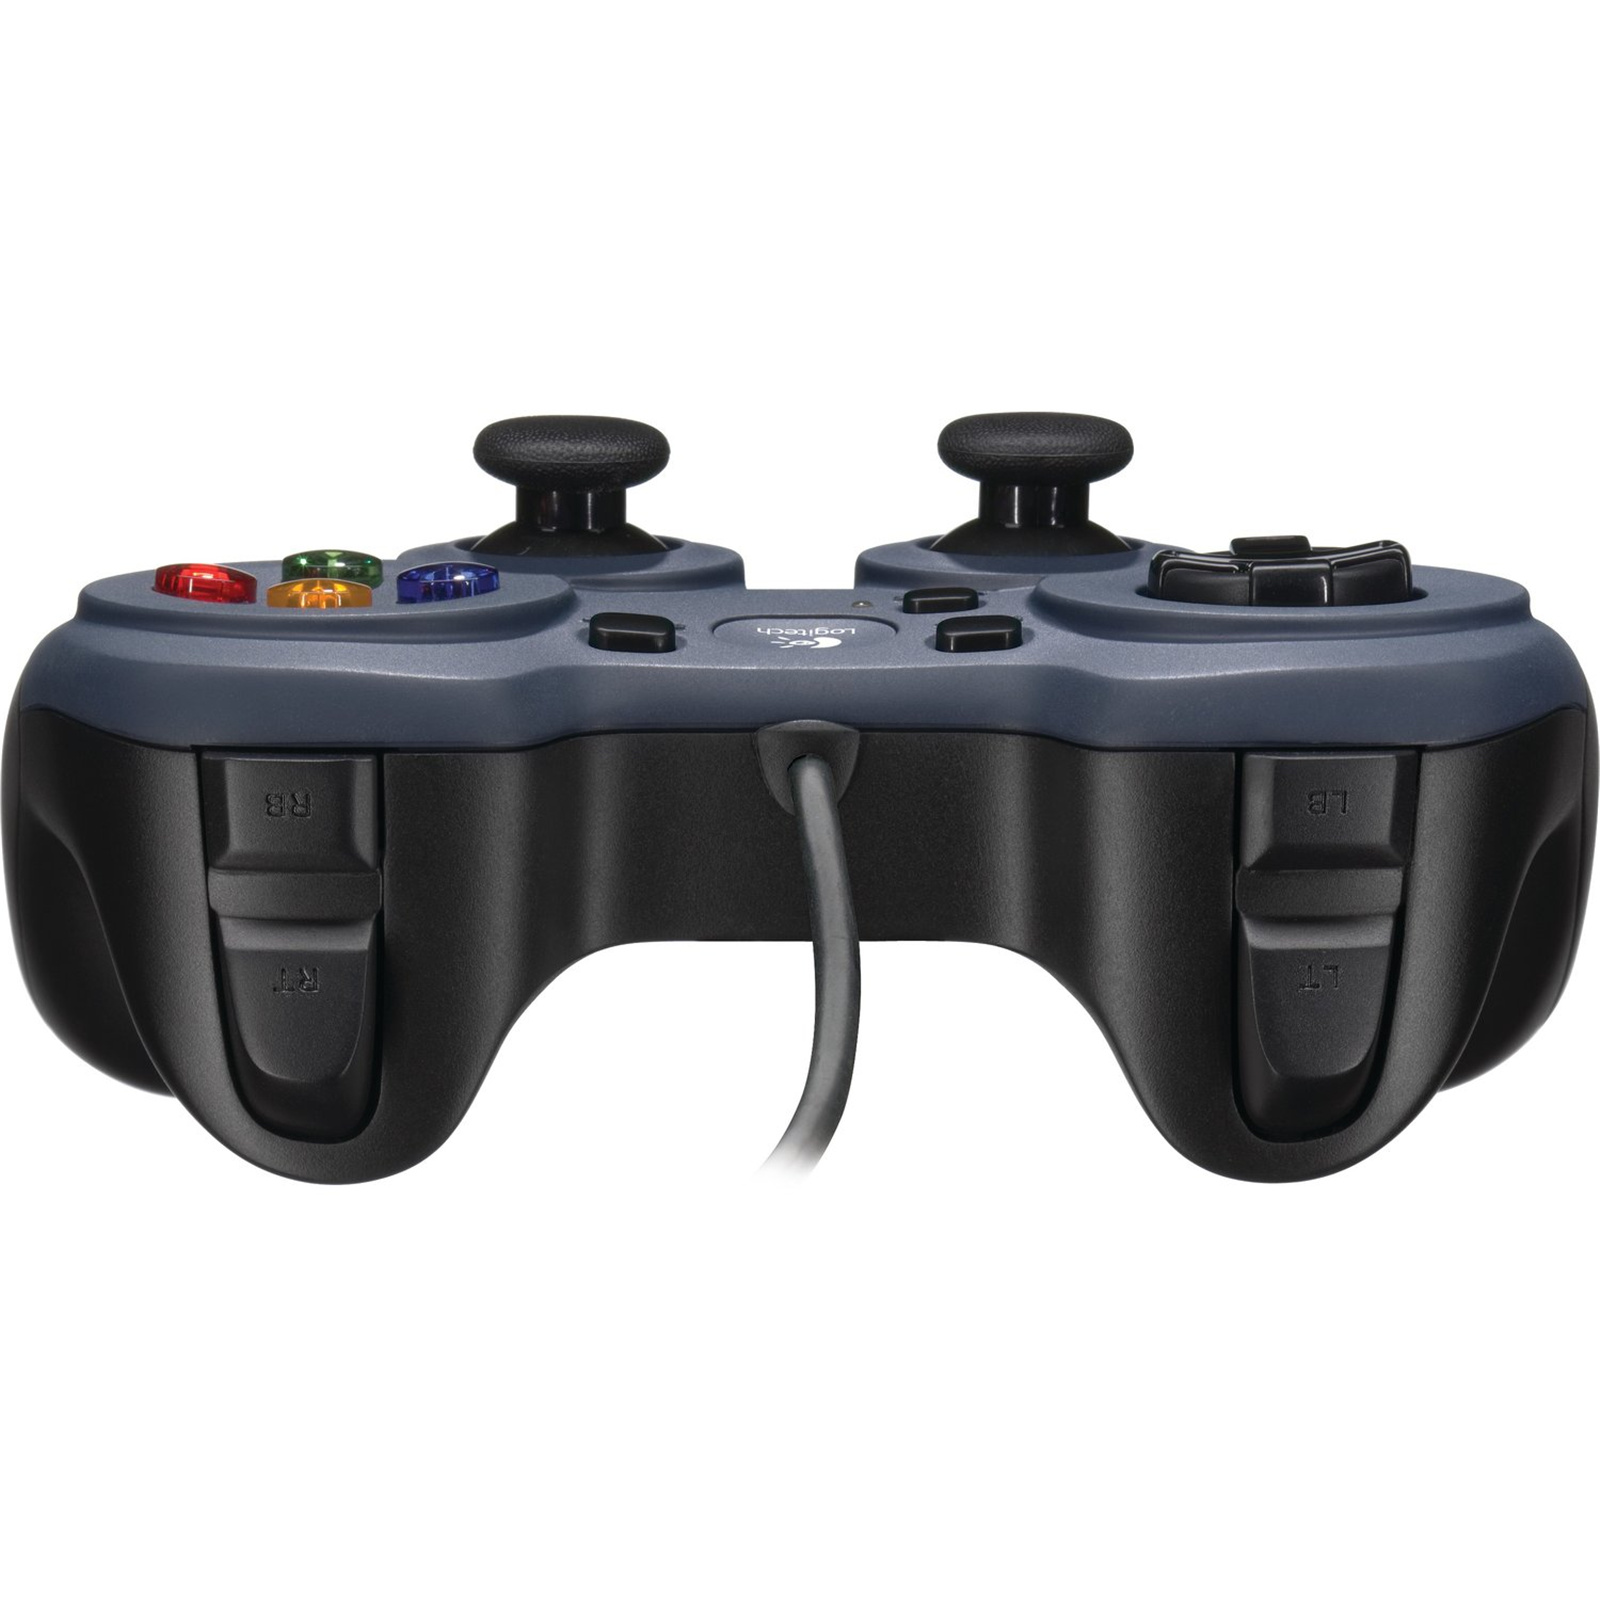 Buy the Logitech F310 Gamepad USB port Precision from two analog sticks  with... ( 940-000112 ) online - PBTech.com/au